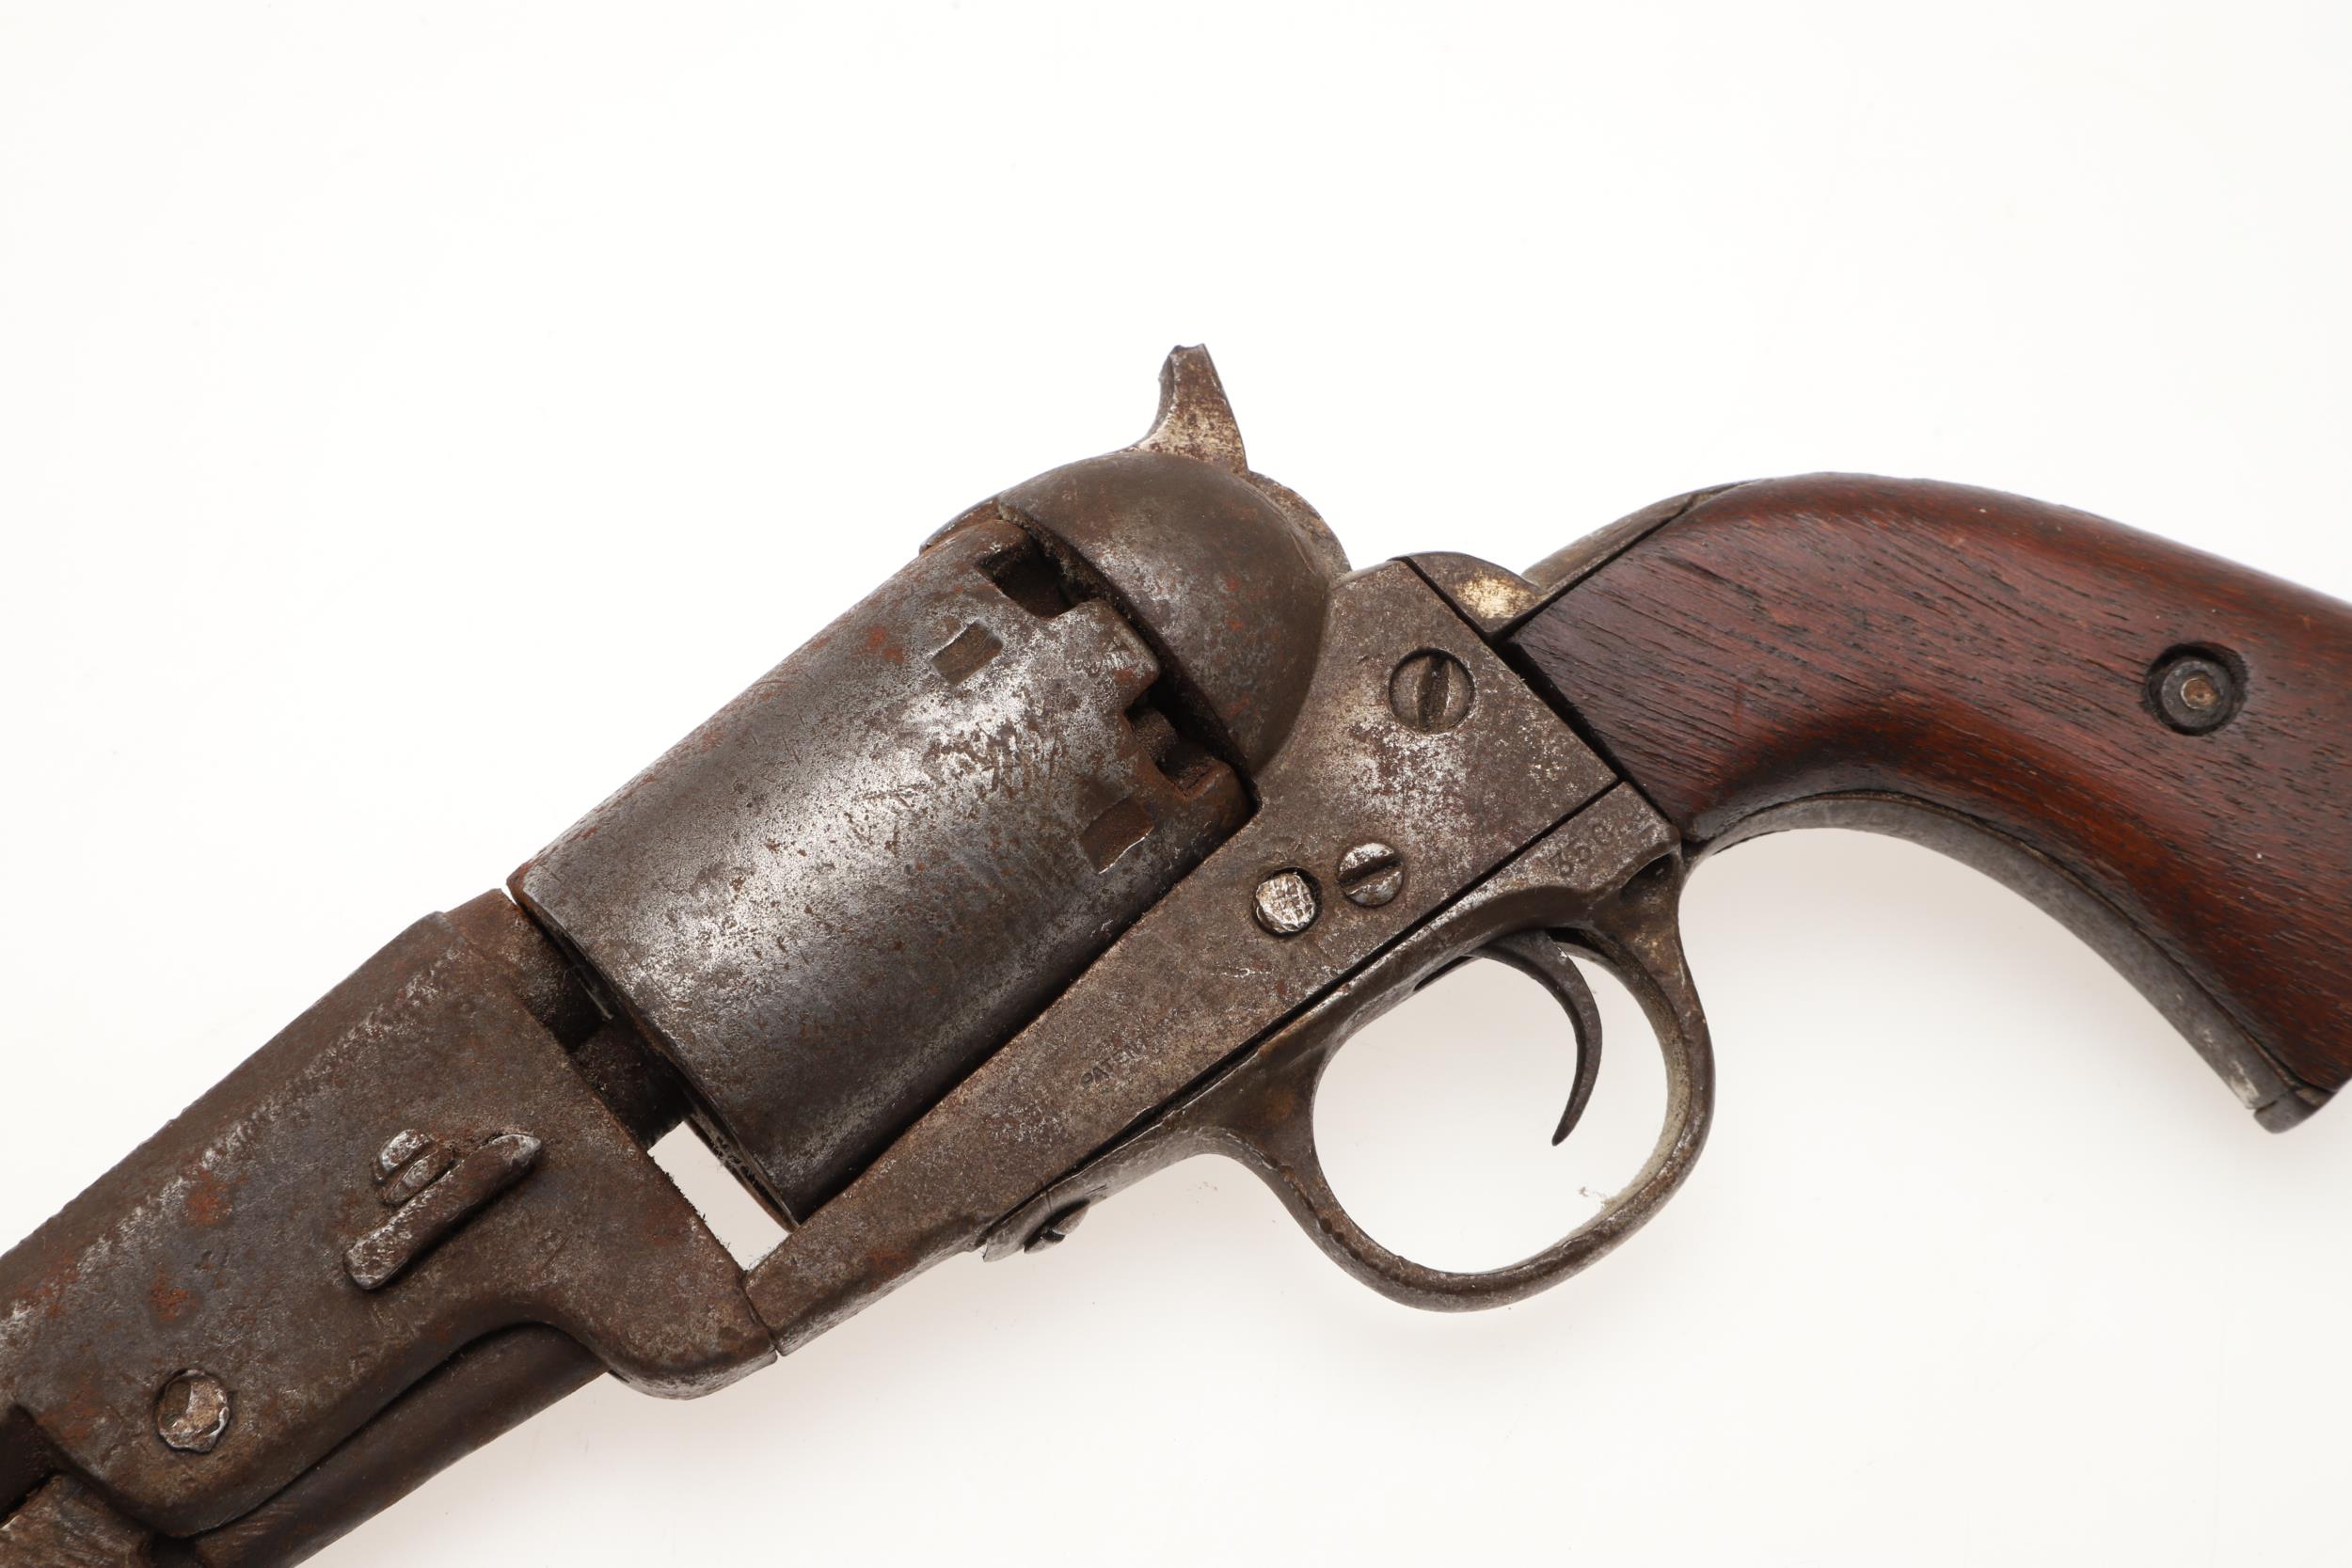 A COLT STYLE PERCUSSION FIRING REVOLVER. - Image 5 of 5